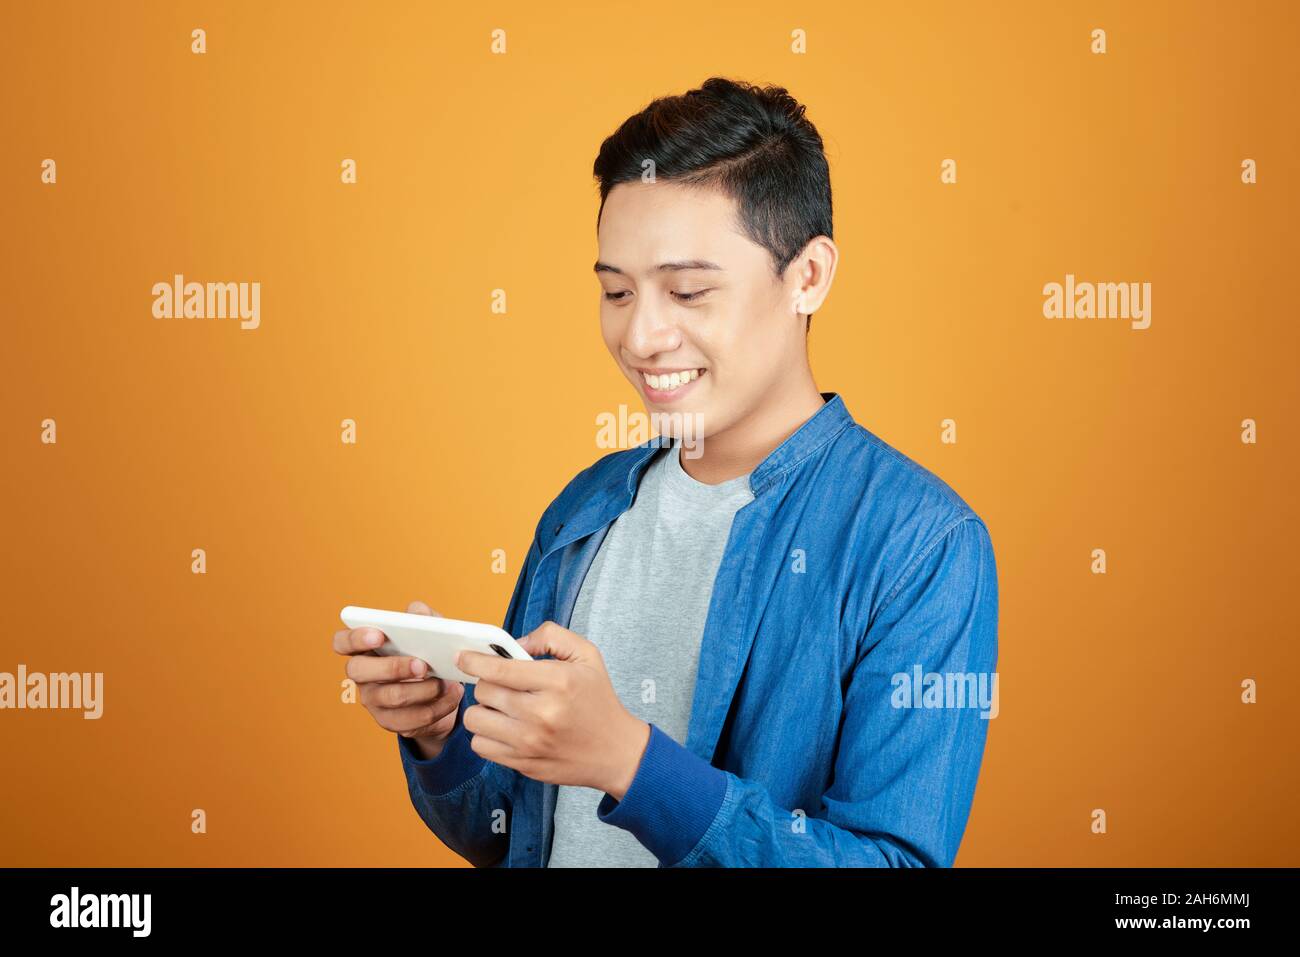 Smiling young good looking Asian man using smartphone isolated on bright orange studio background Stock Photo